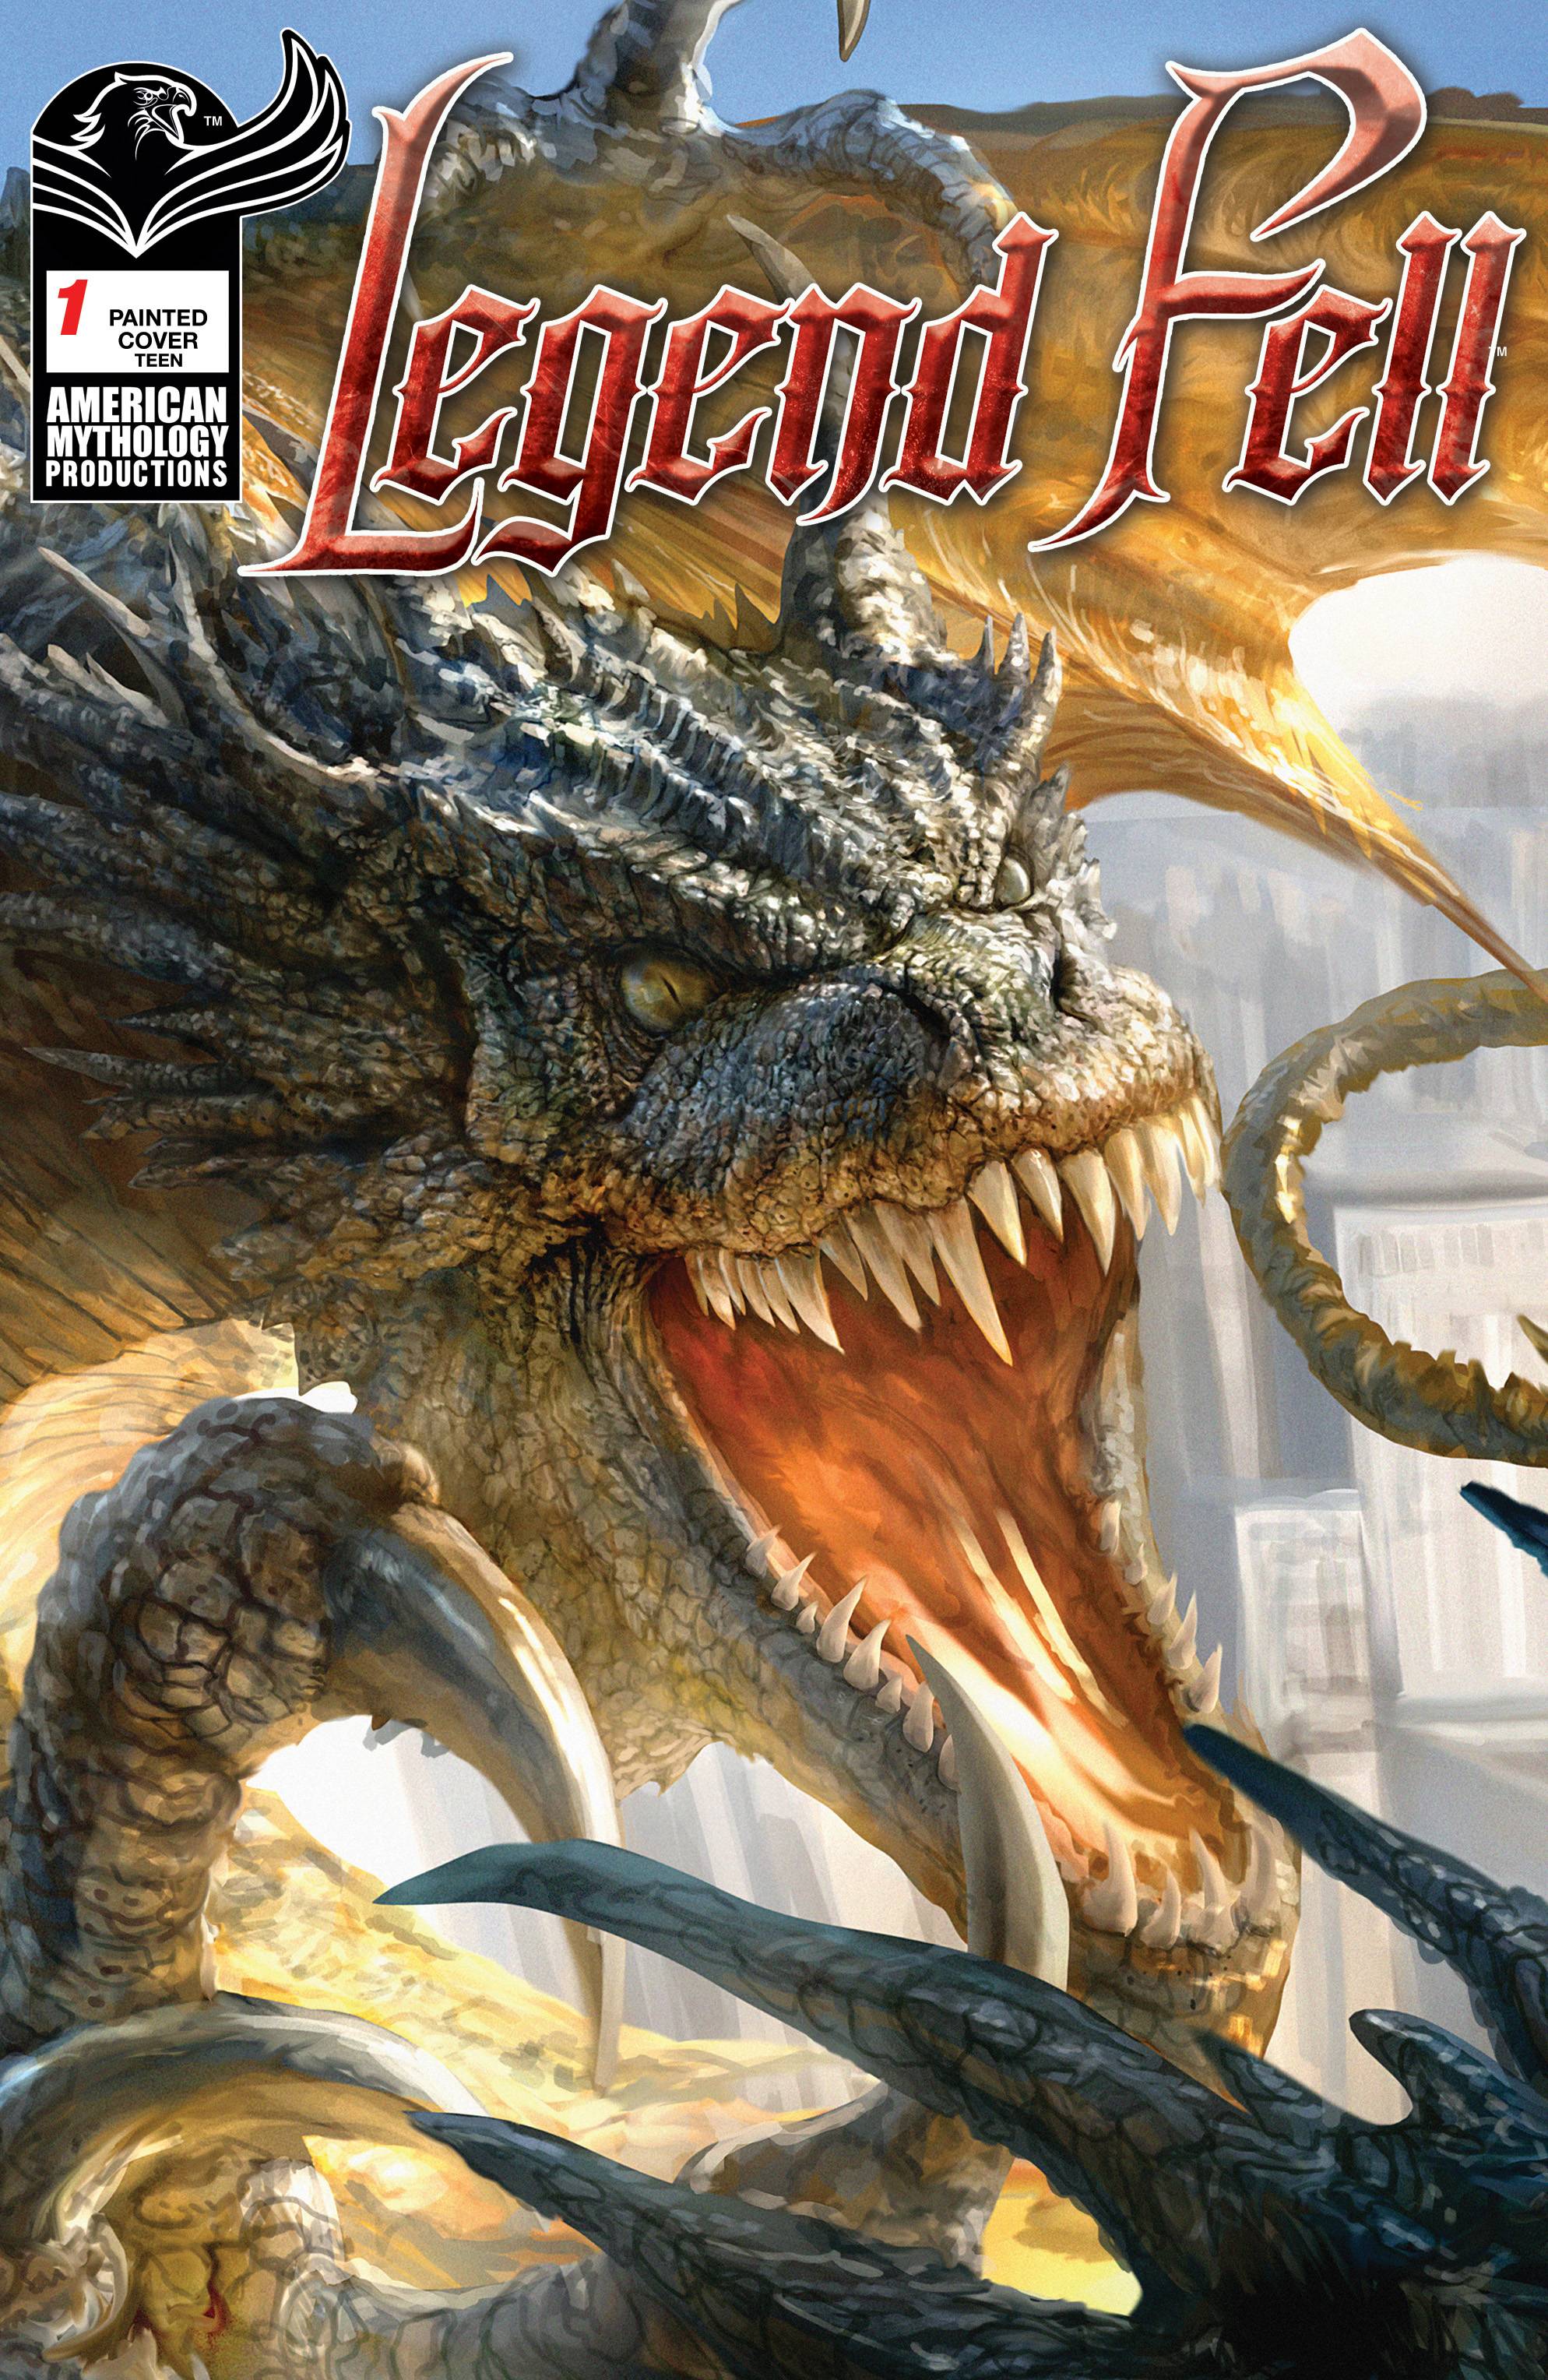 Legend Fell #1 Cover E Dragon Painted Foc